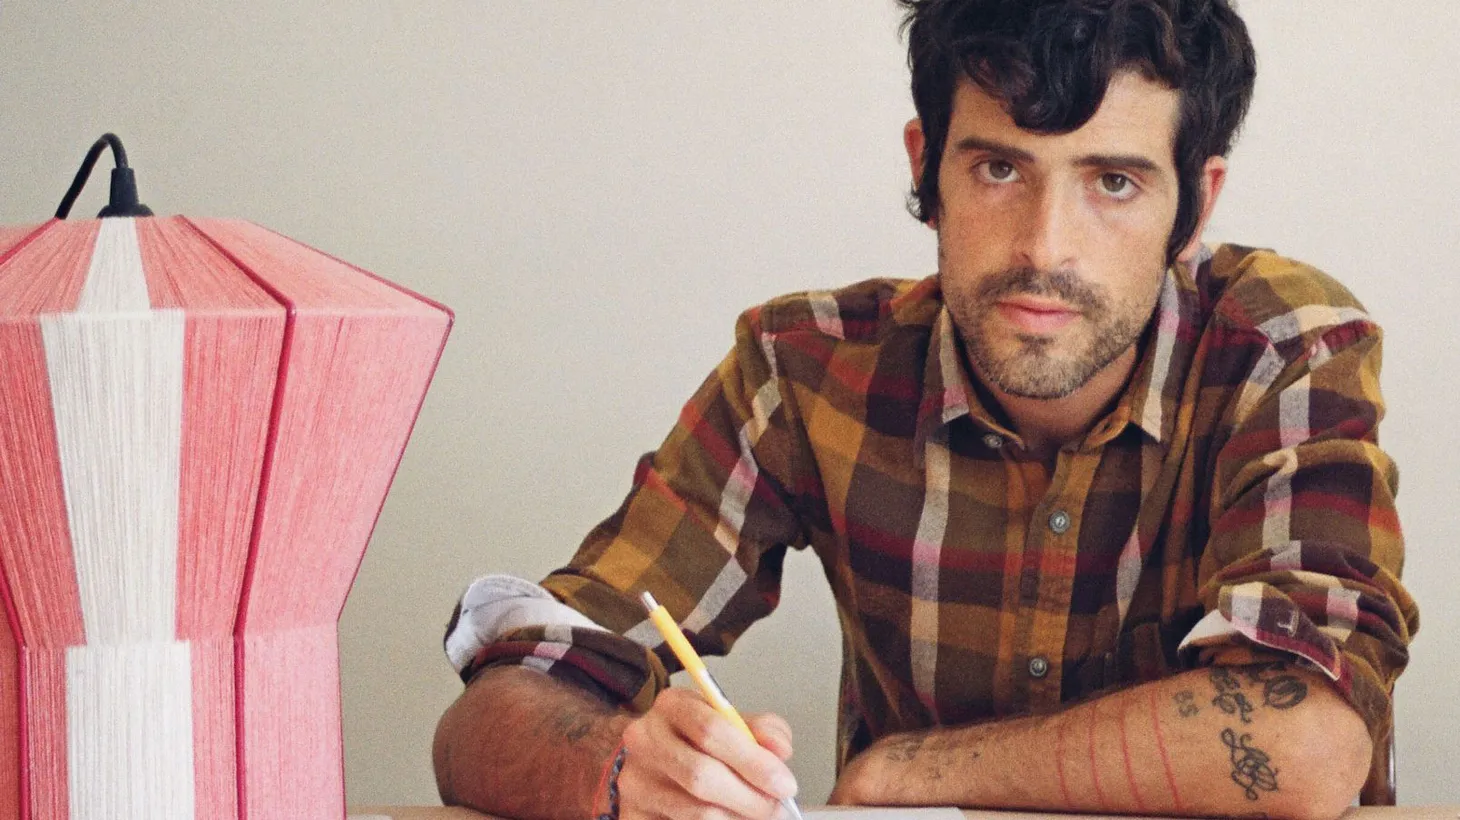 Devendra Banhart is a playful singer-songwriter who easily skips across genres in song about love and life.